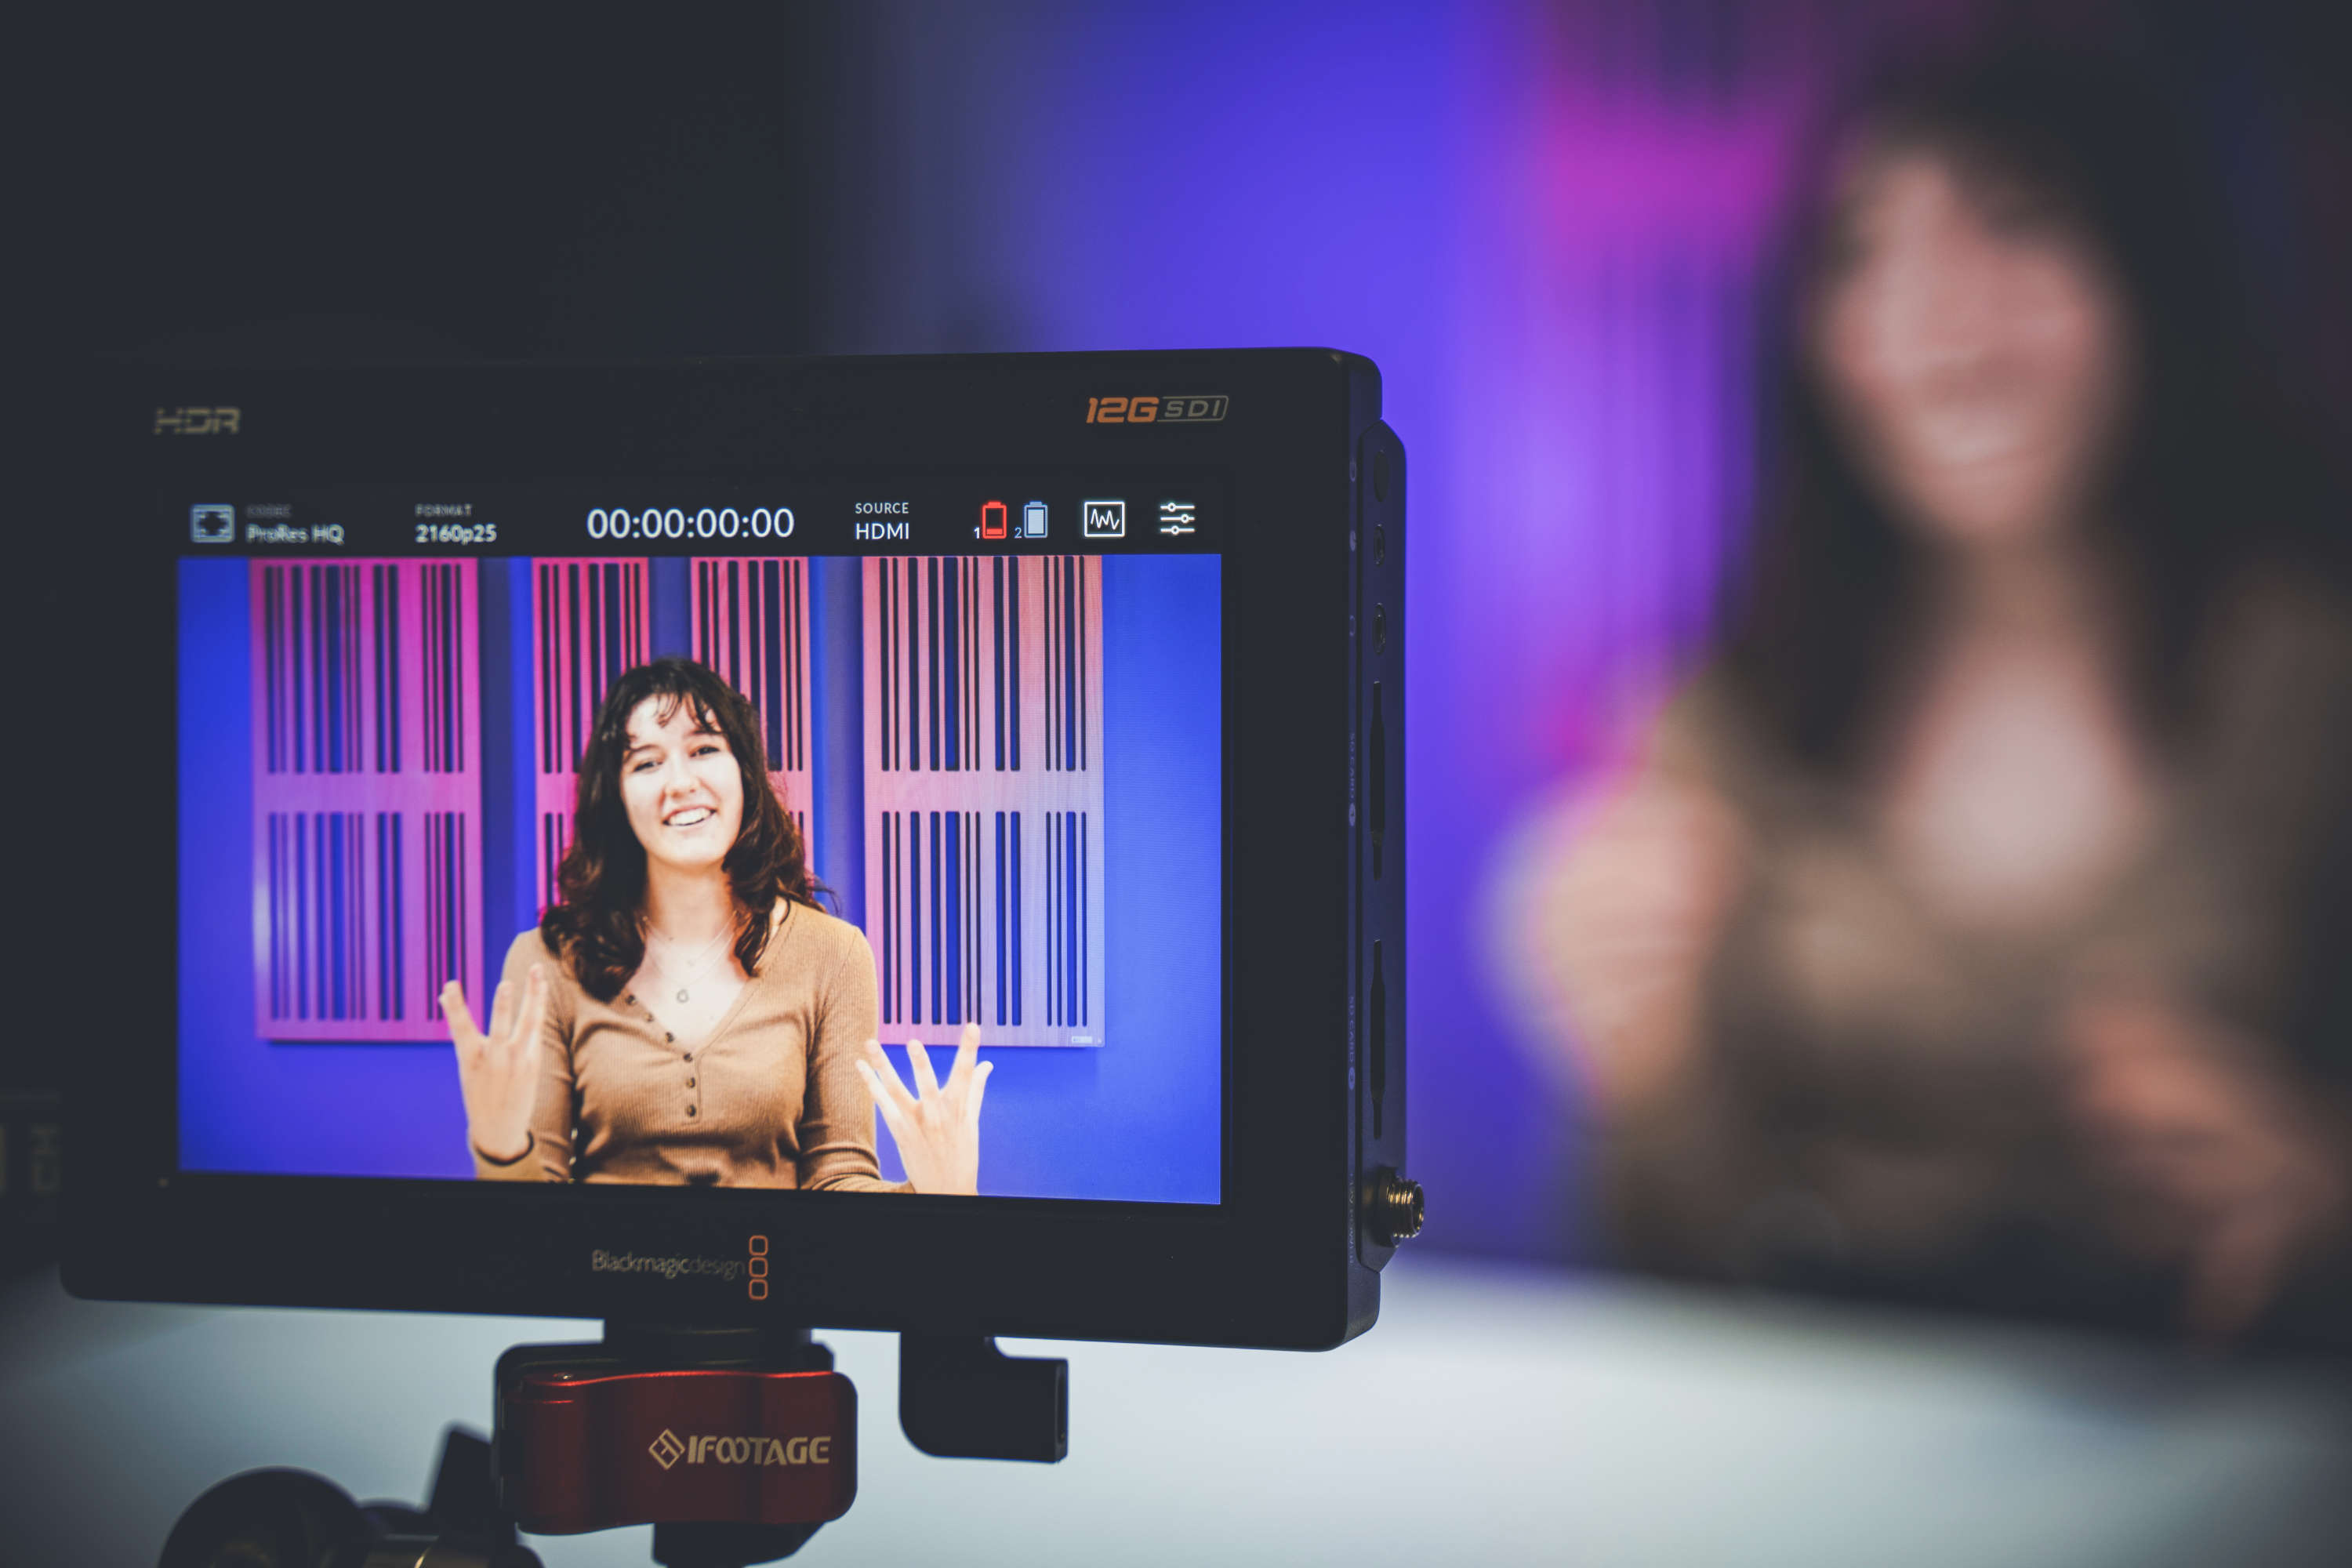 A video presenter gestures to the camera, viewed through a camera connected monitor. The presenter is also visible in the background, but out of focus.